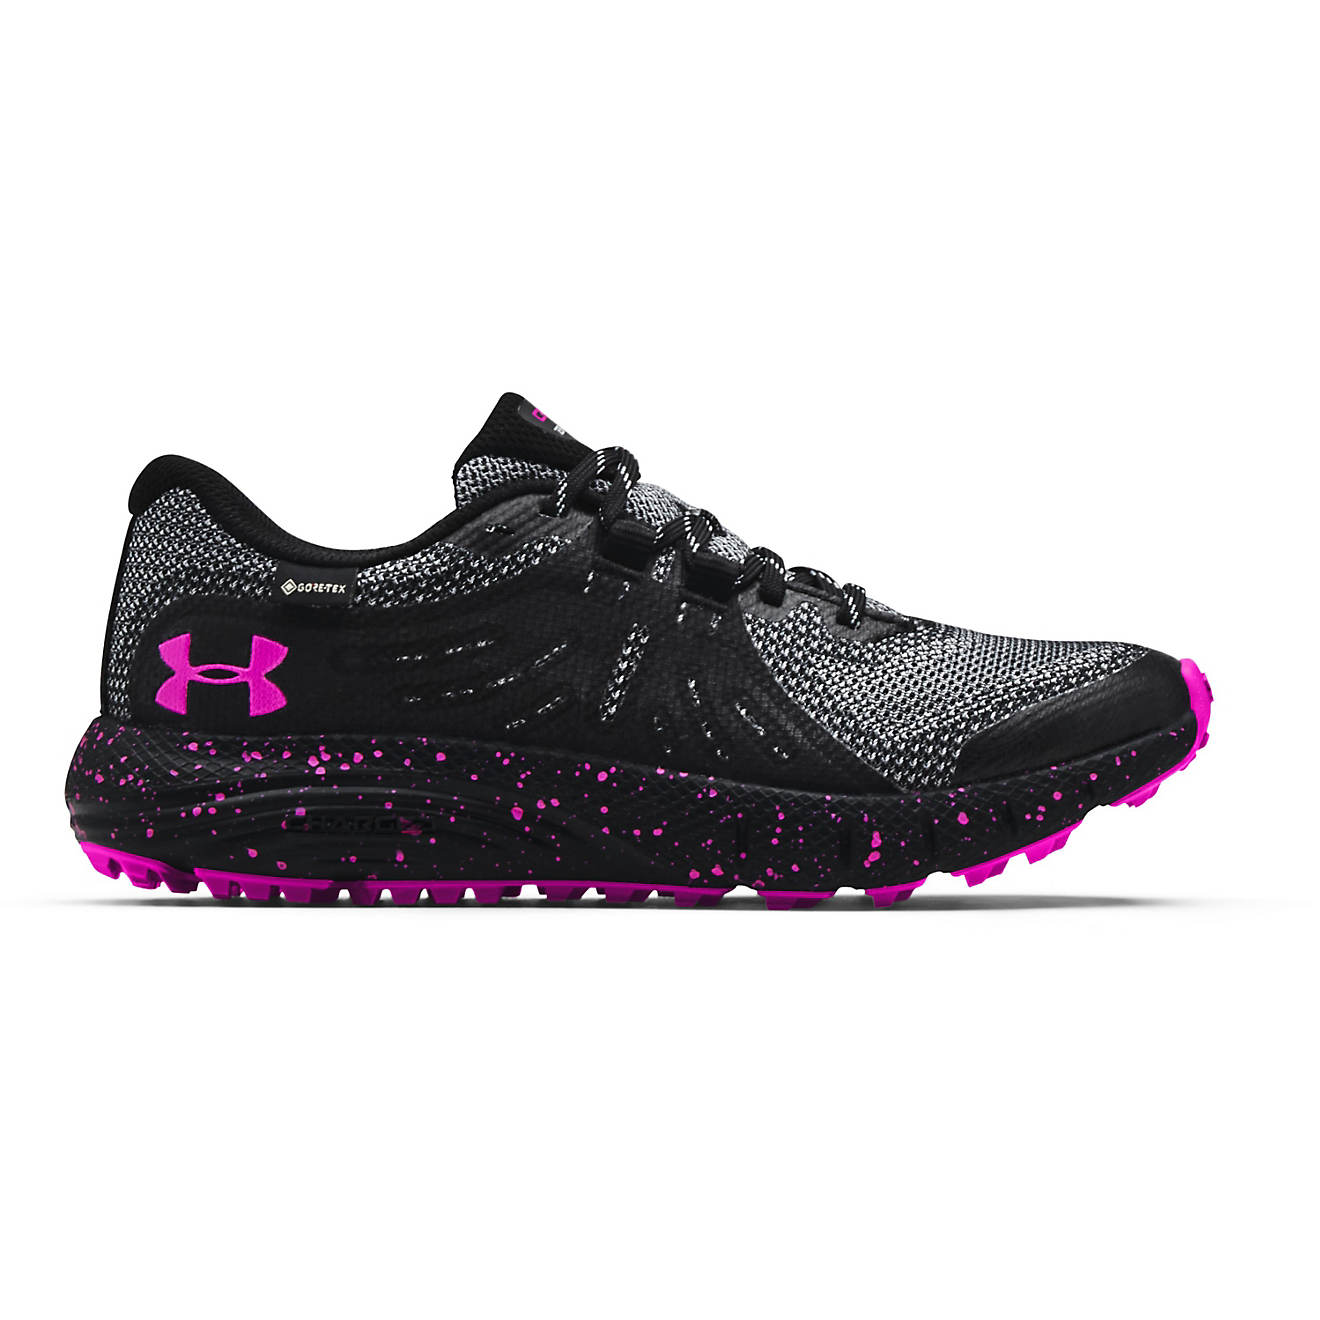 Under Armour Women's Charged Bandit Trail GORE-TEX Running Shoes | Academy